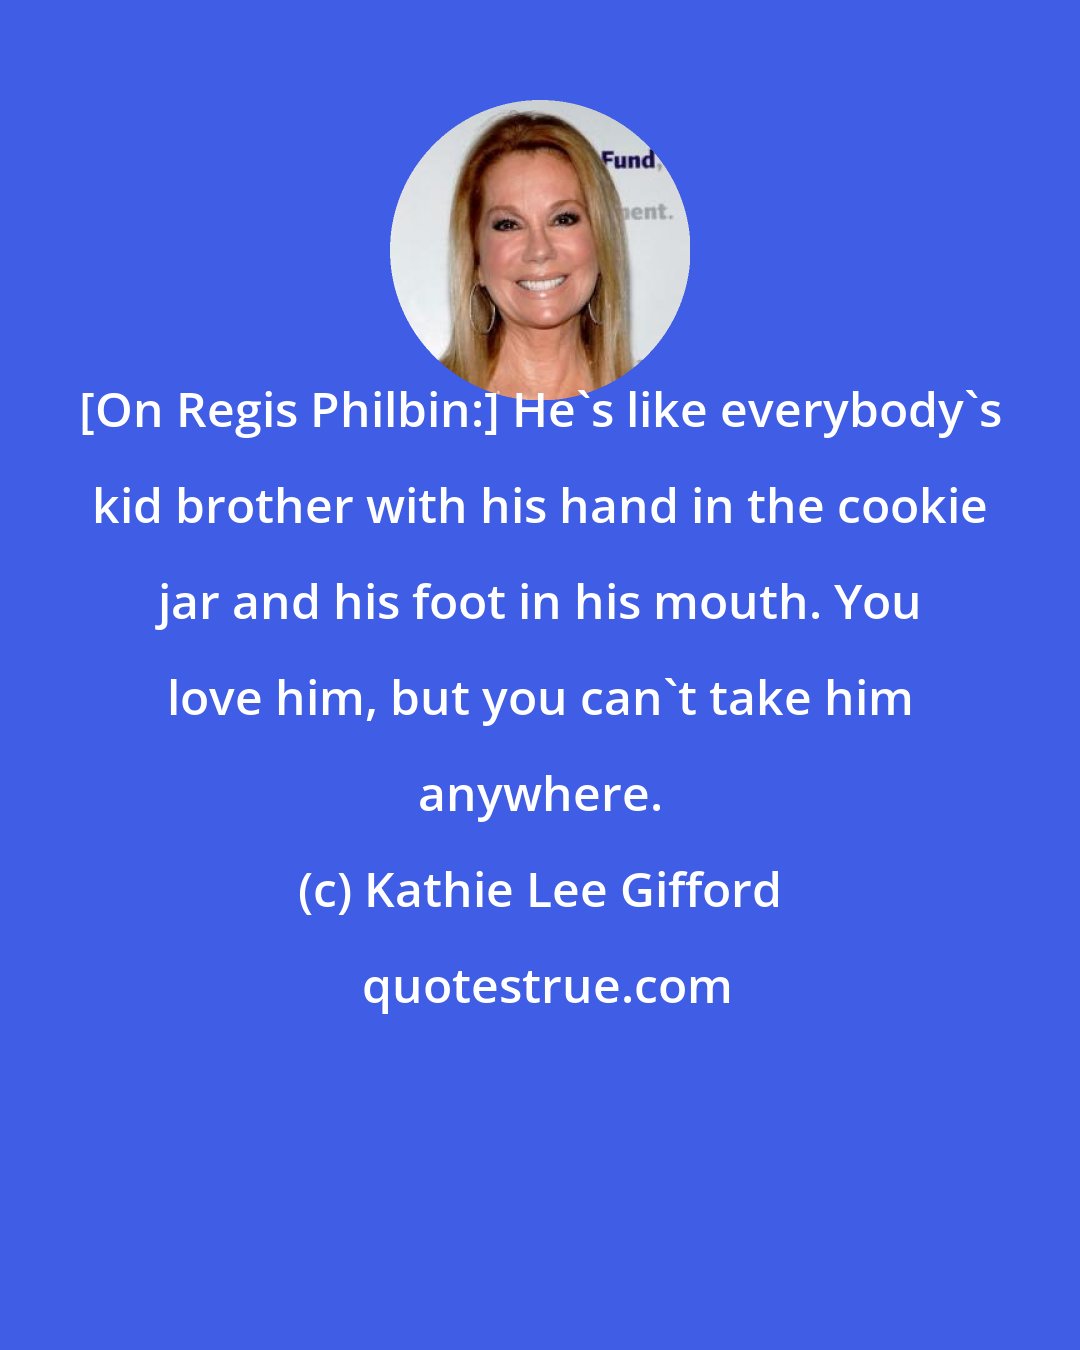 Kathie Lee Gifford: [On Regis Philbin:] He's like everybody's kid brother with his hand in the cookie jar and his foot in his mouth. You love him, but you can't take him anywhere.